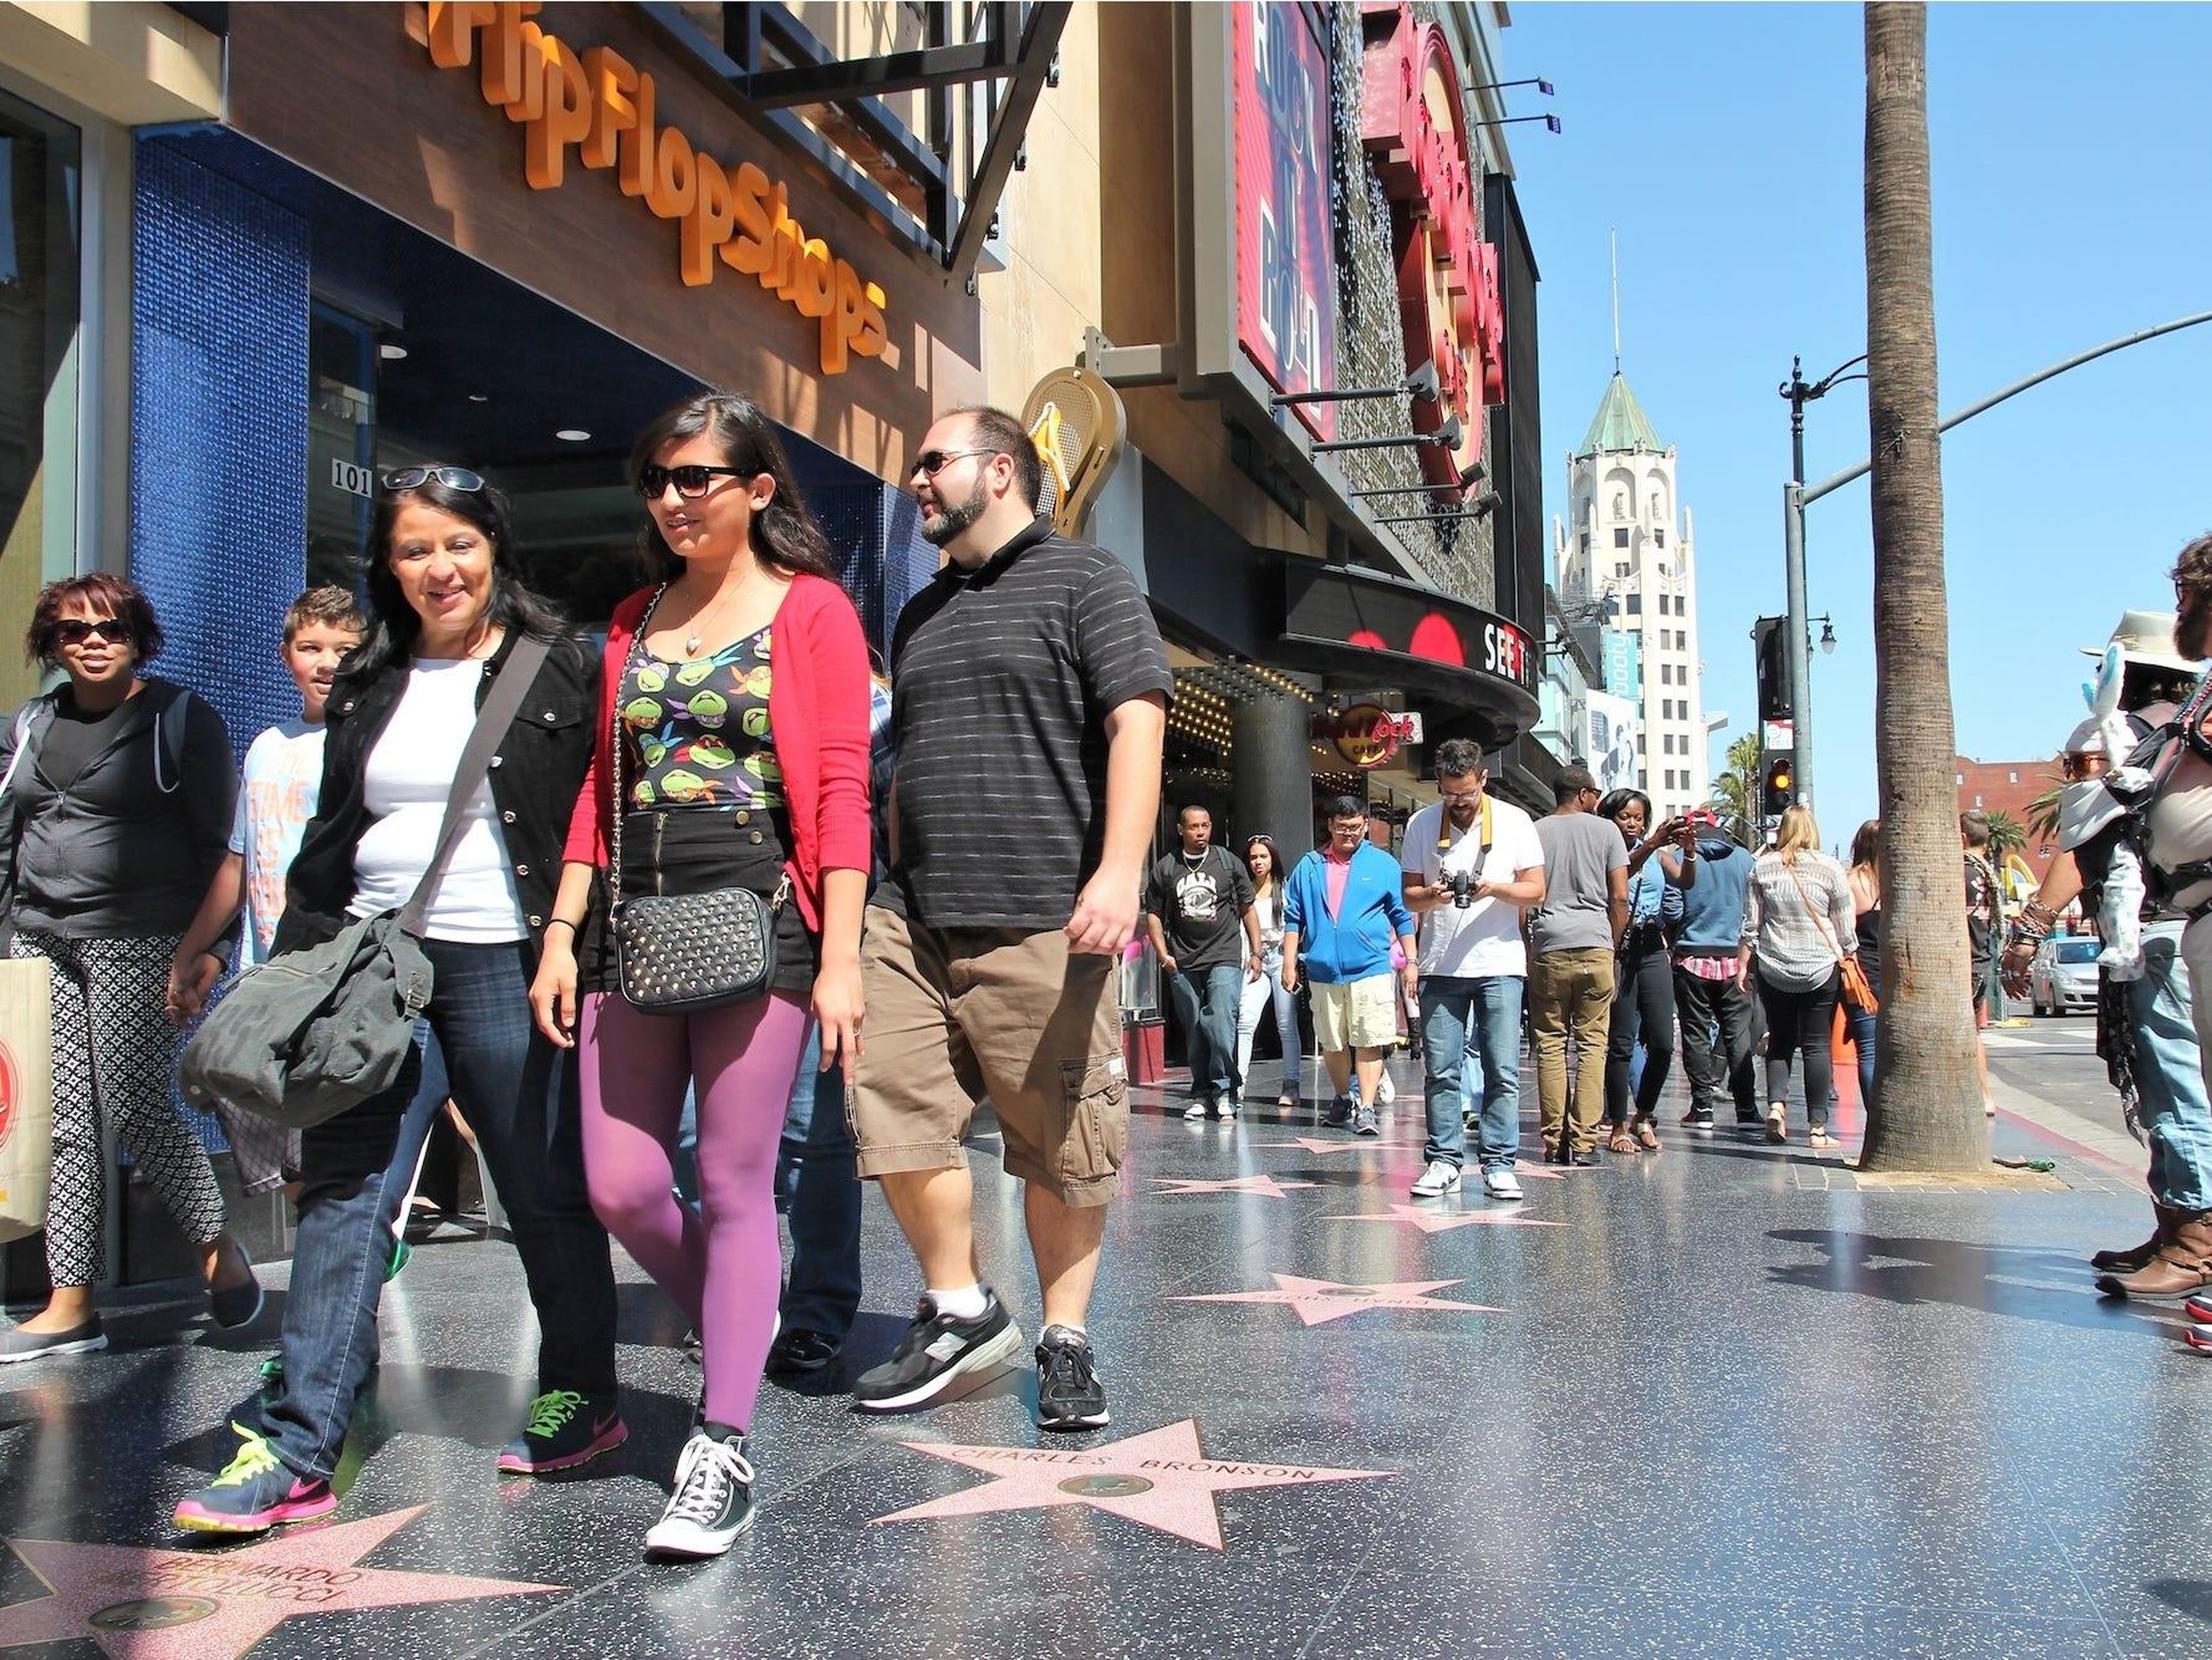 BEFORE: When in Los Angeles, the Hollywood Walk of Fame is a must-visit.